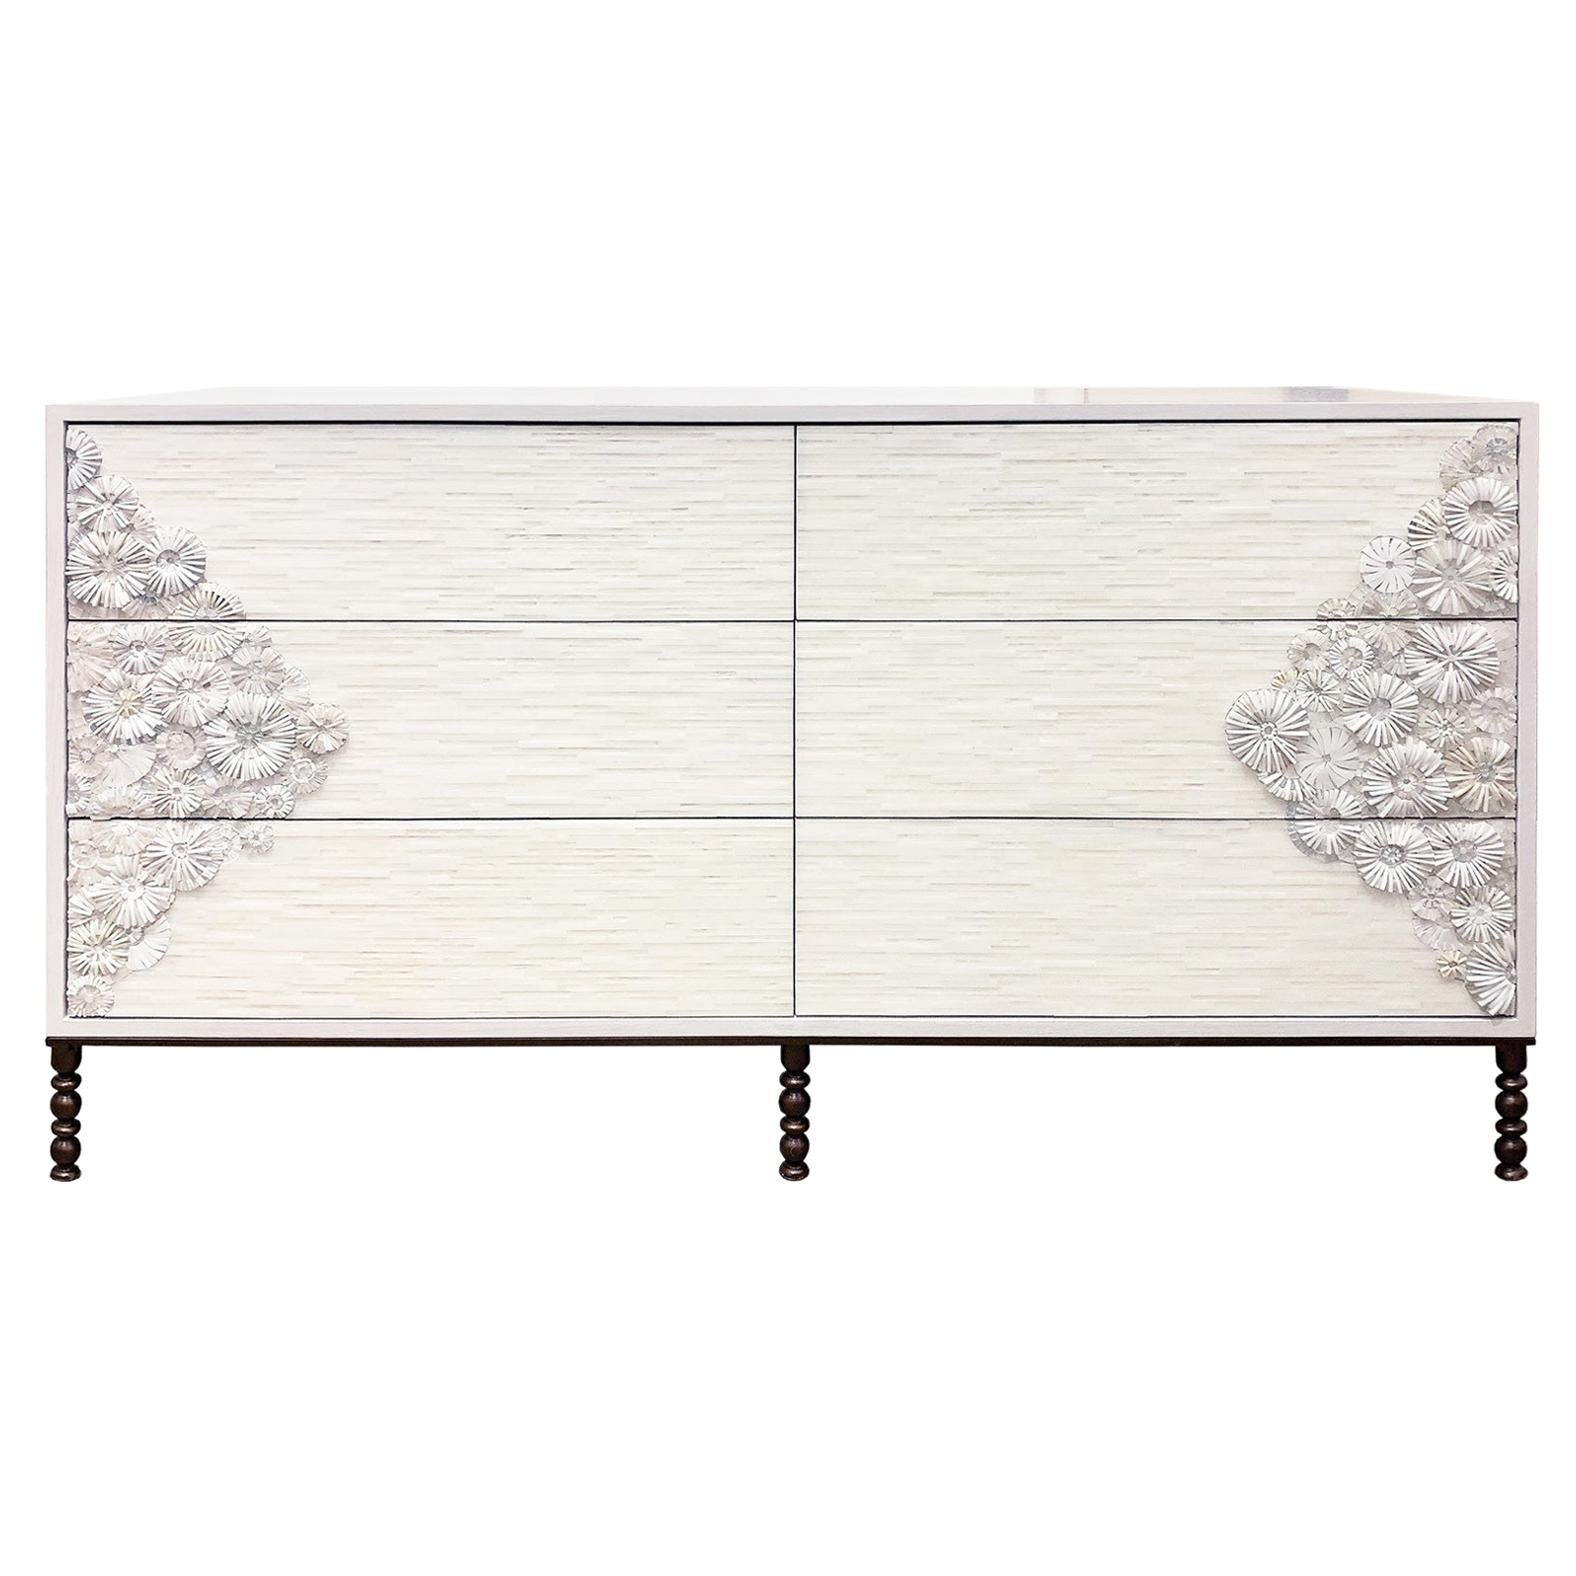 Customizable White Blossom Flower Glass Mosaic 6-Chest of Drawer by Ercole Home